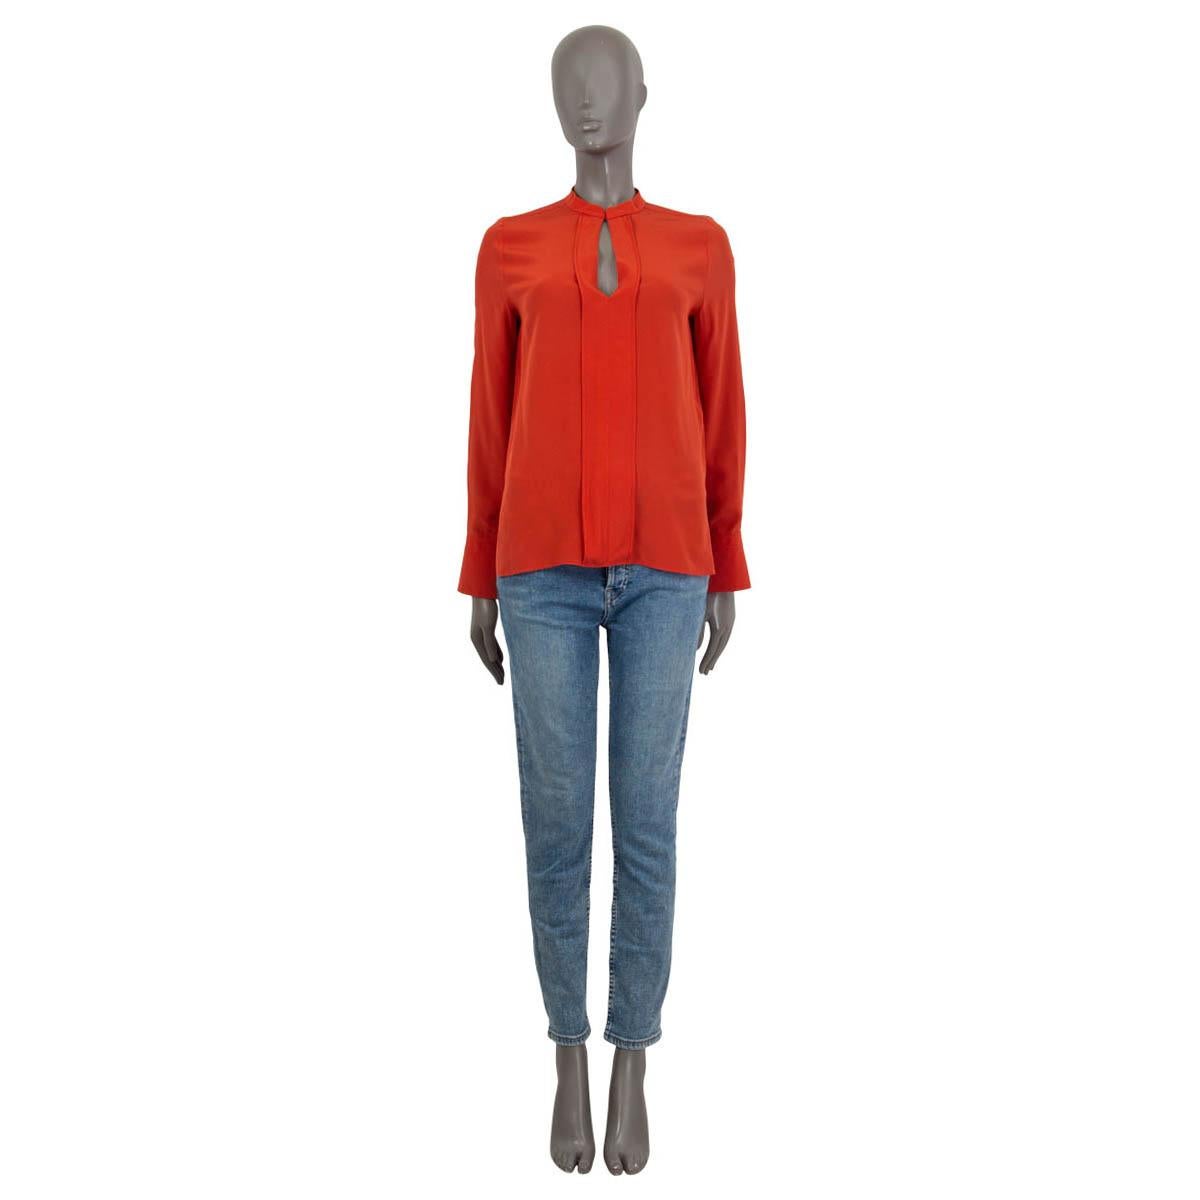 100% authentic Chloé long sleeve keyhole blouse in carmine red silk (100%). Features an oversized fit and buttoned cuffs. Opens with a concealed button at the neck. Unlined. Has a barely visible stain on the sleeve, otherwise in excellent